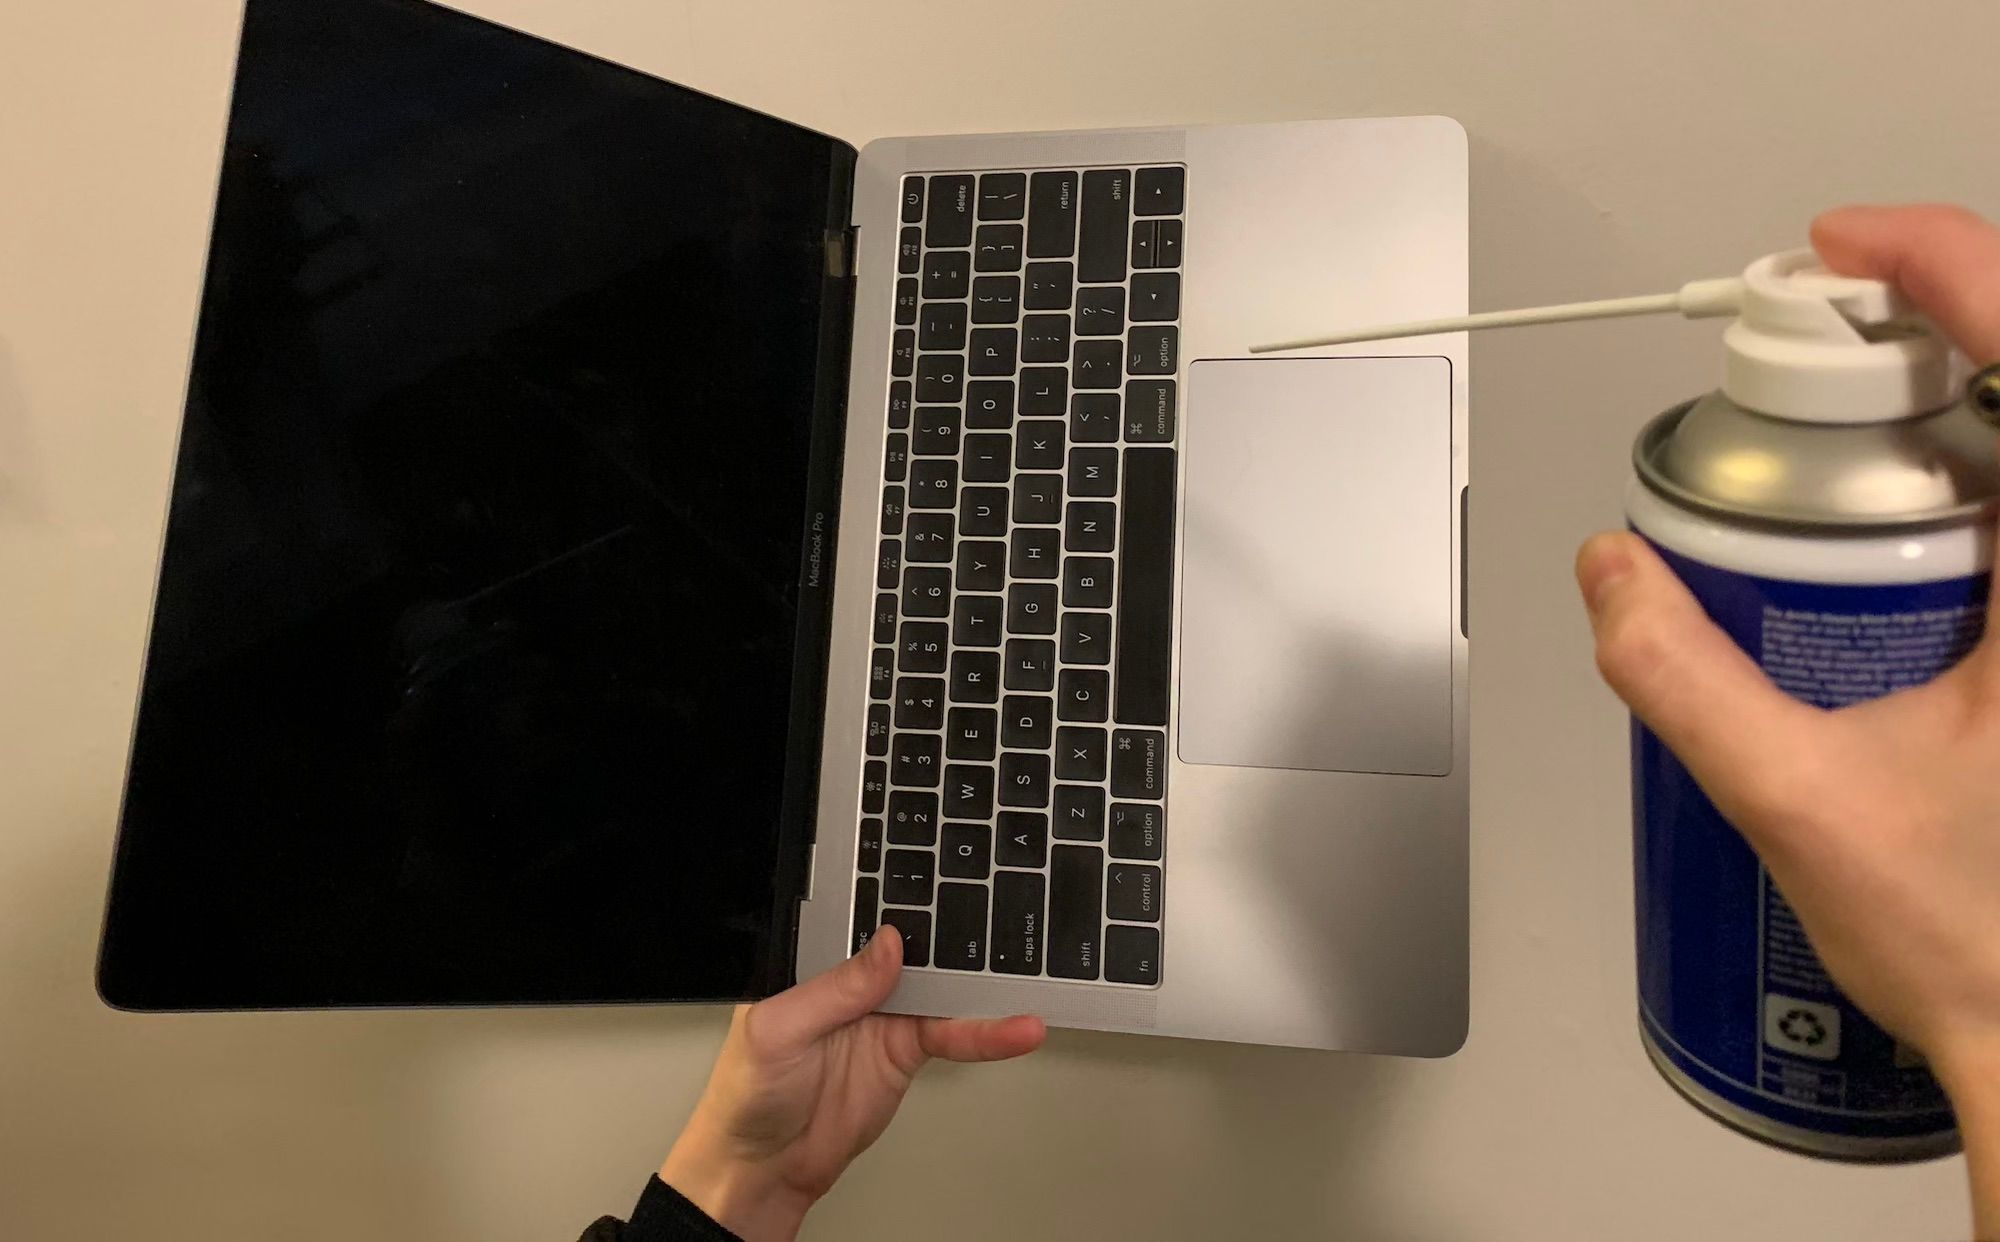 A hand holding an open macbook in the air, rotated 90 degrees to the left, with a hand pointing a compressed air can at the keyboard